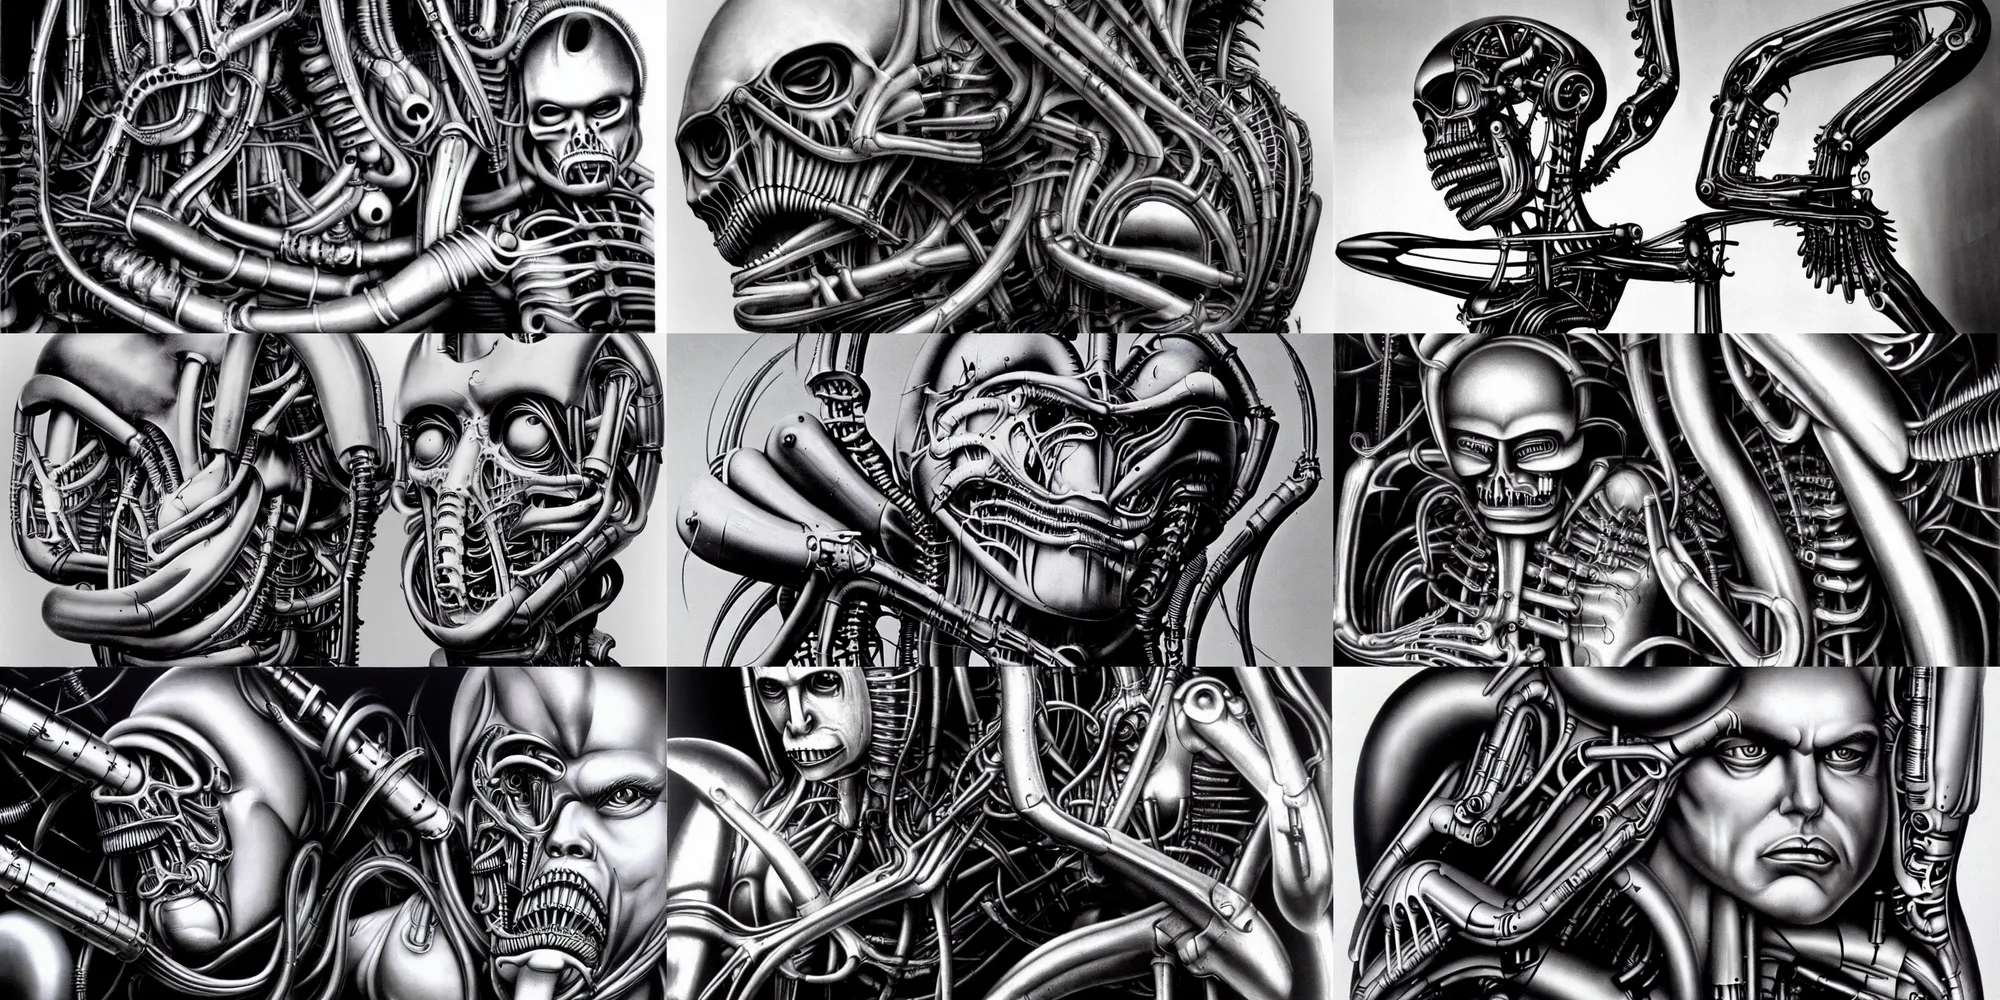 Prompt: hans ruedi giger was a swiss artist best known for his airbrushed images that blended human physiques with machines, an art style known as biomechanical.